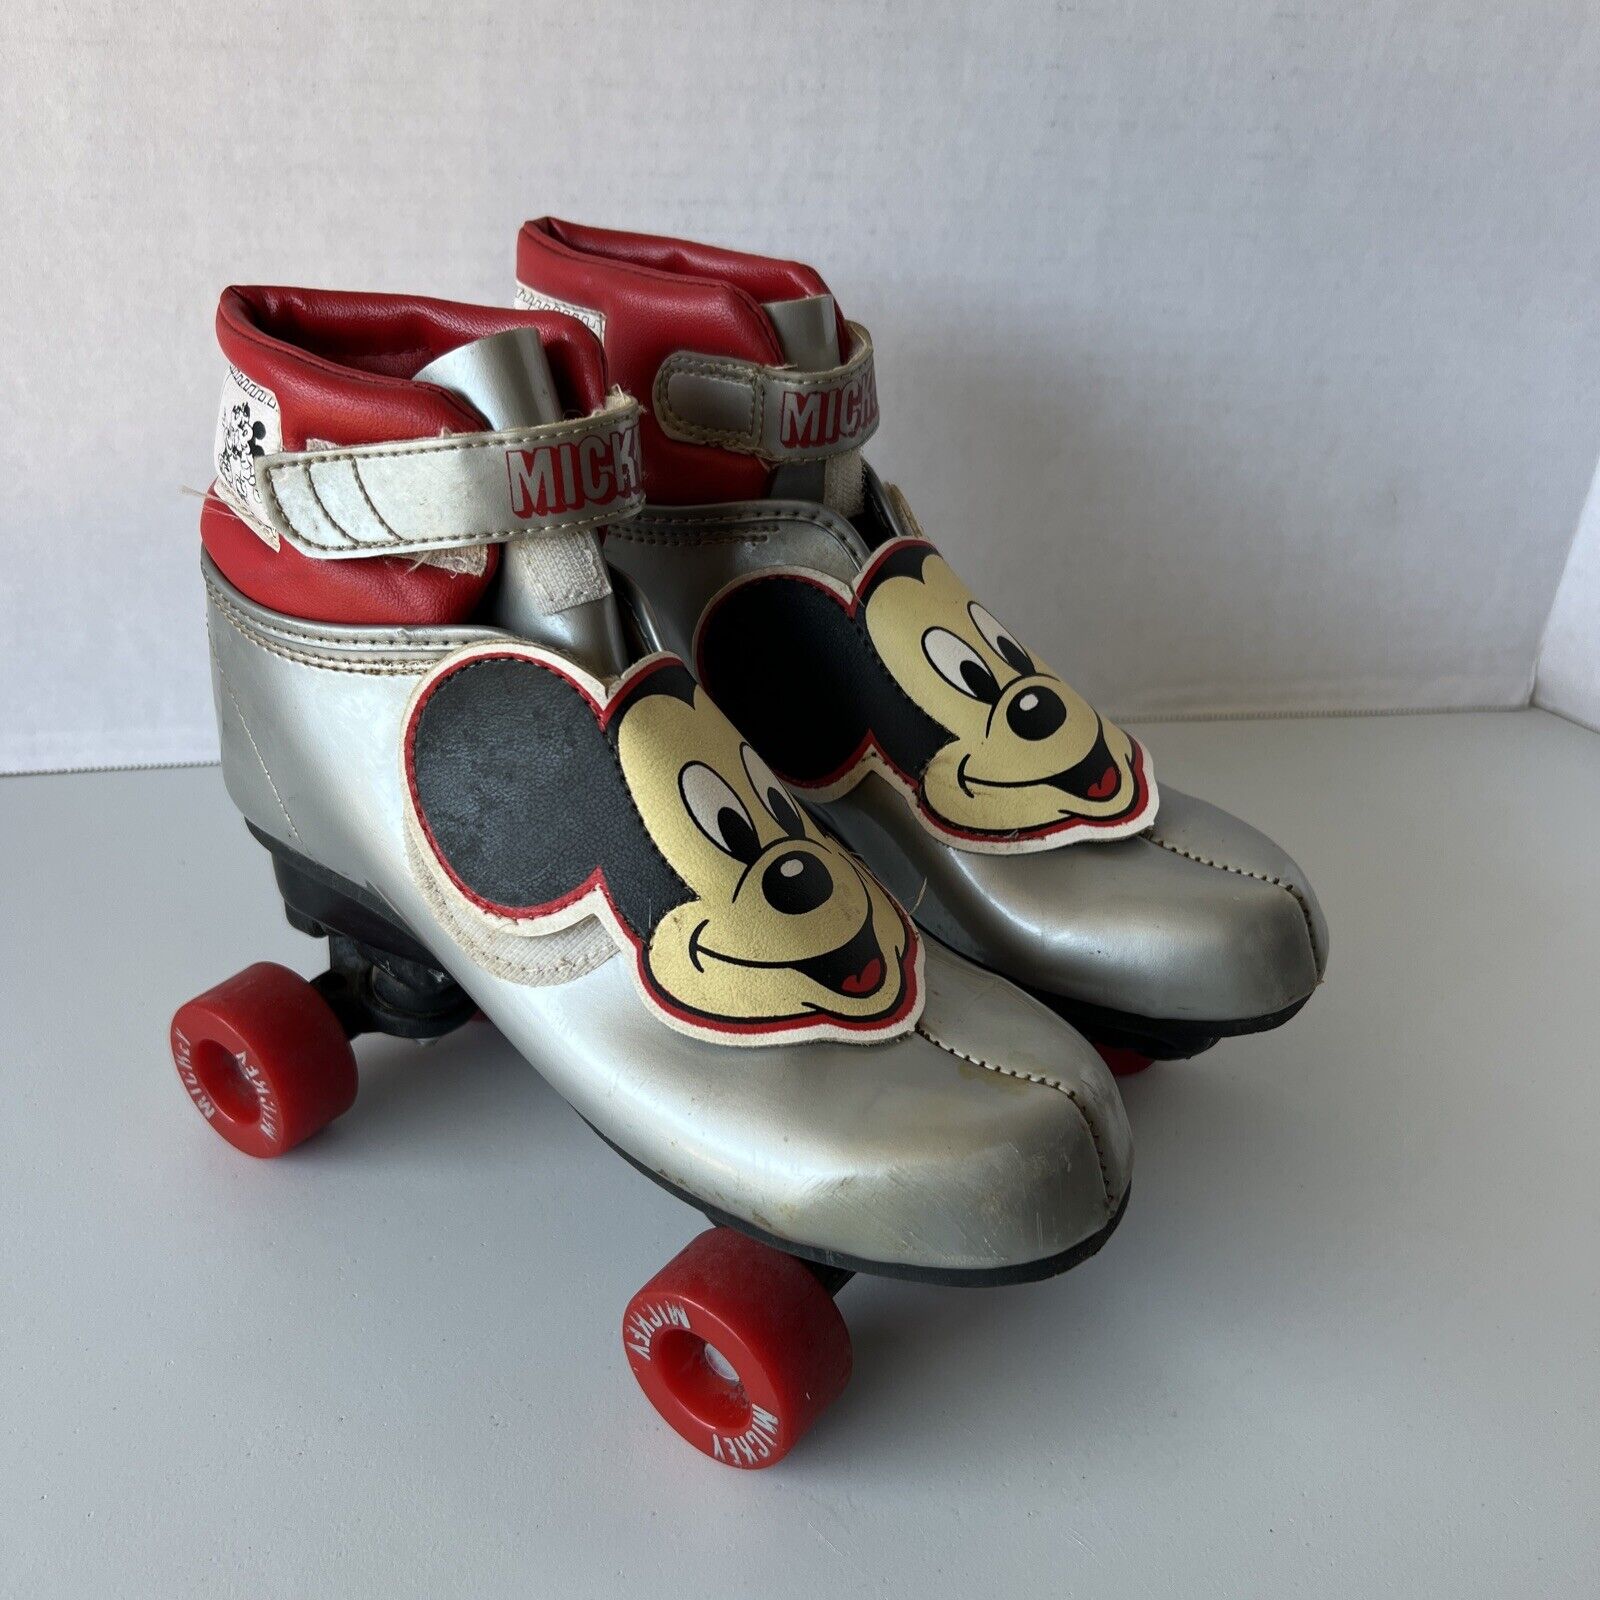 Vintage Disney Mickey Mouse Youth Roller Skates Silver & Red Boot Size 4